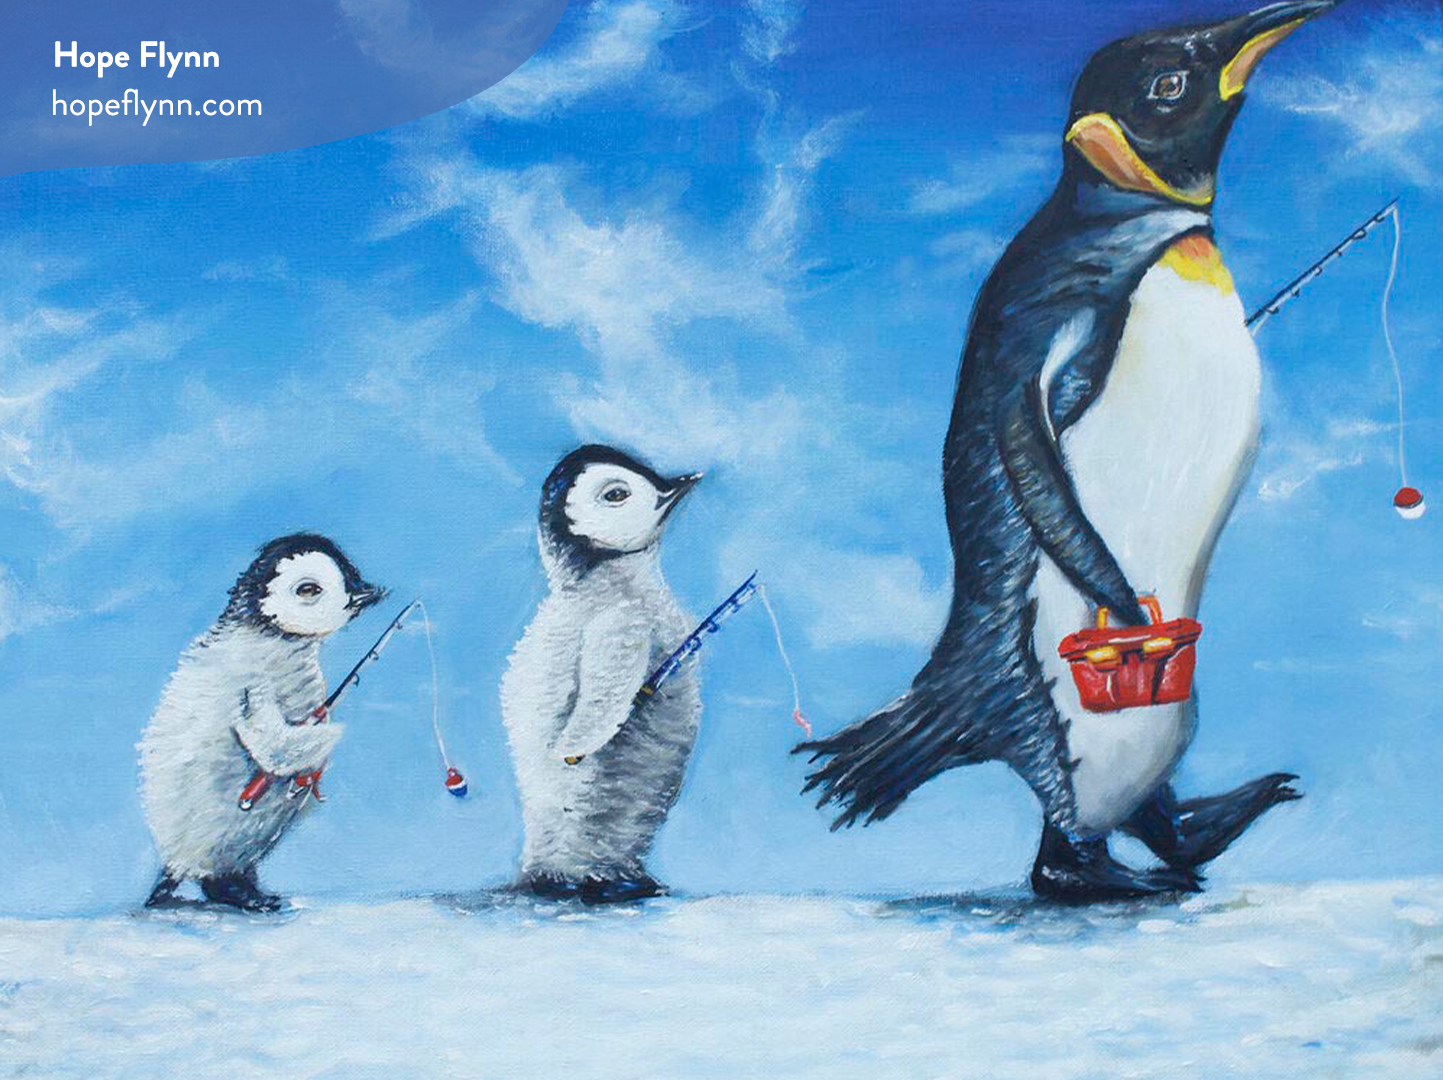 Landscape painting by Hope Flynn, featuring two baby penguins and an adult penguin holding fishing rods and bins, walking in a snowy environment. There is a watermark with Hope’s name and website (hopeflynn.com).